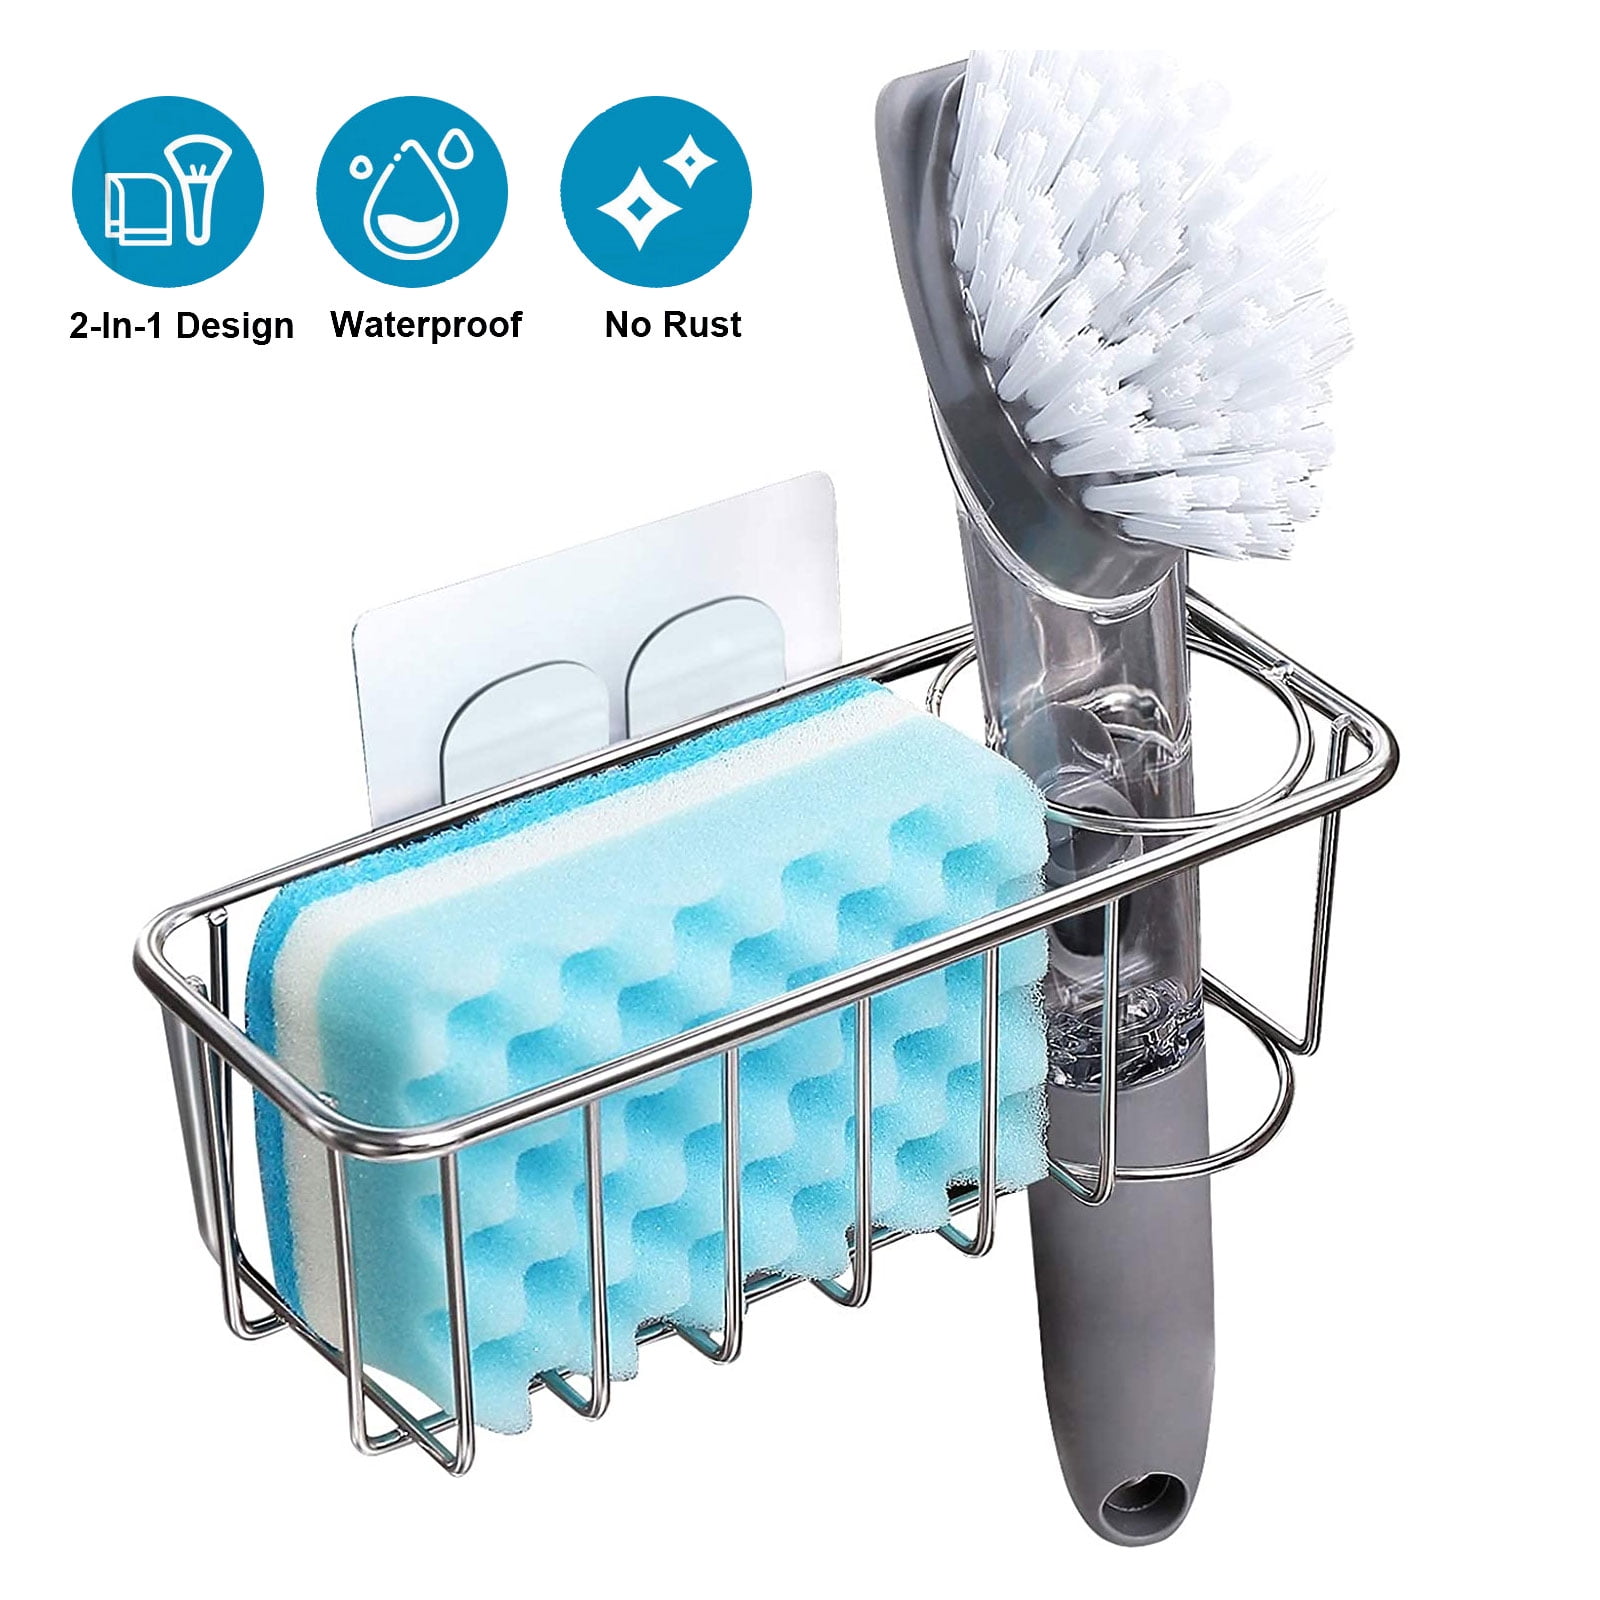 Soap and More MetroDecor mDesign Sponge Holder with Suction Cups Clear Kitchen Sink Organiser Sink Tidy Ideal for Storing Sponges or for Holding Brushes